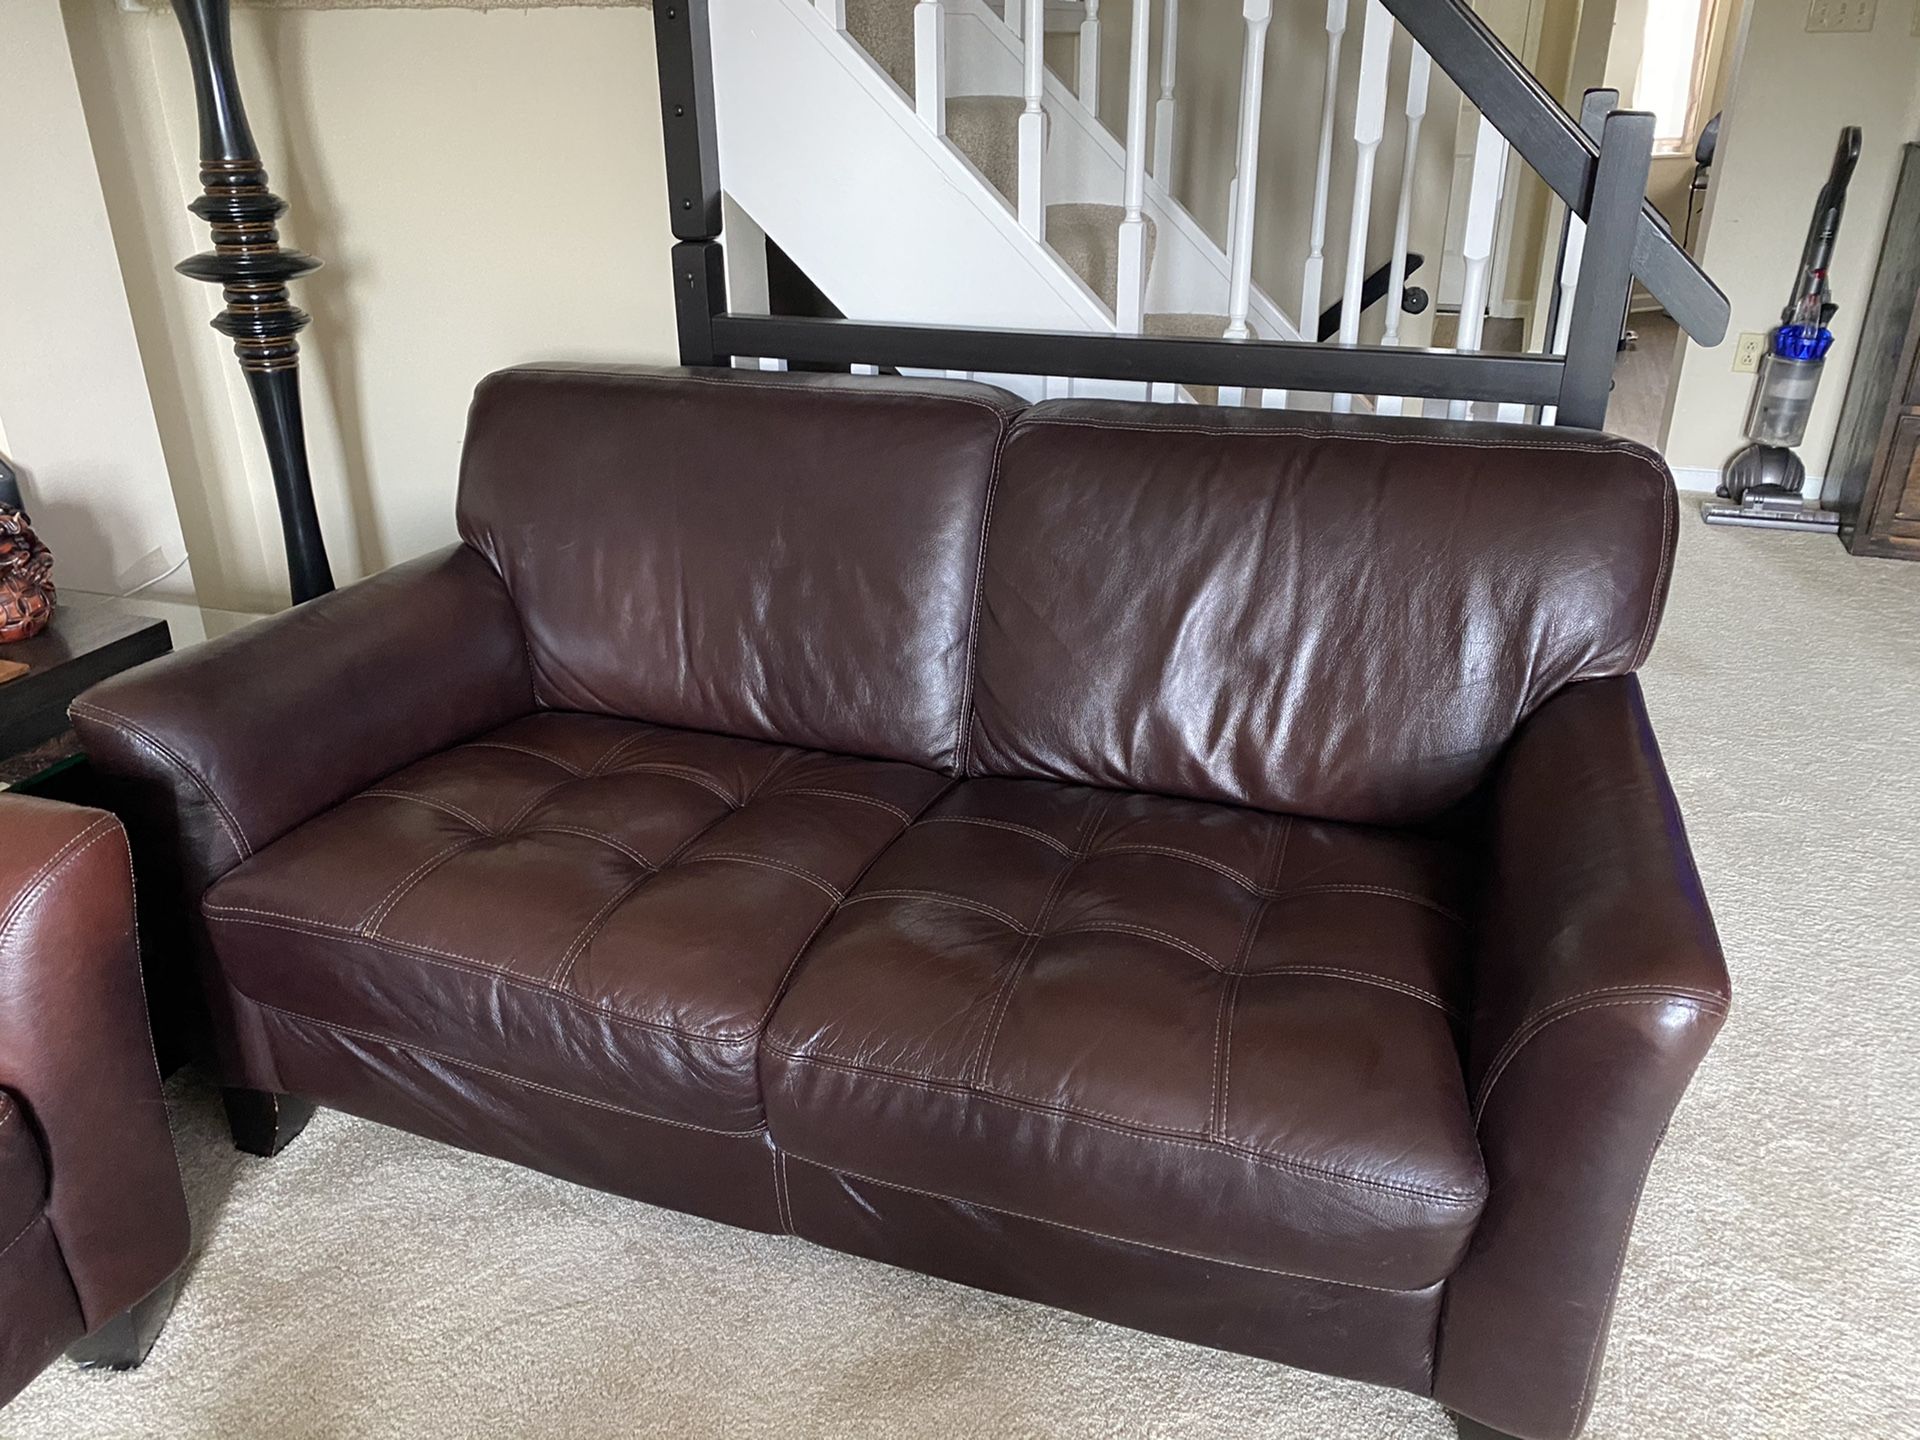 100% Real leather sofa and love seat!